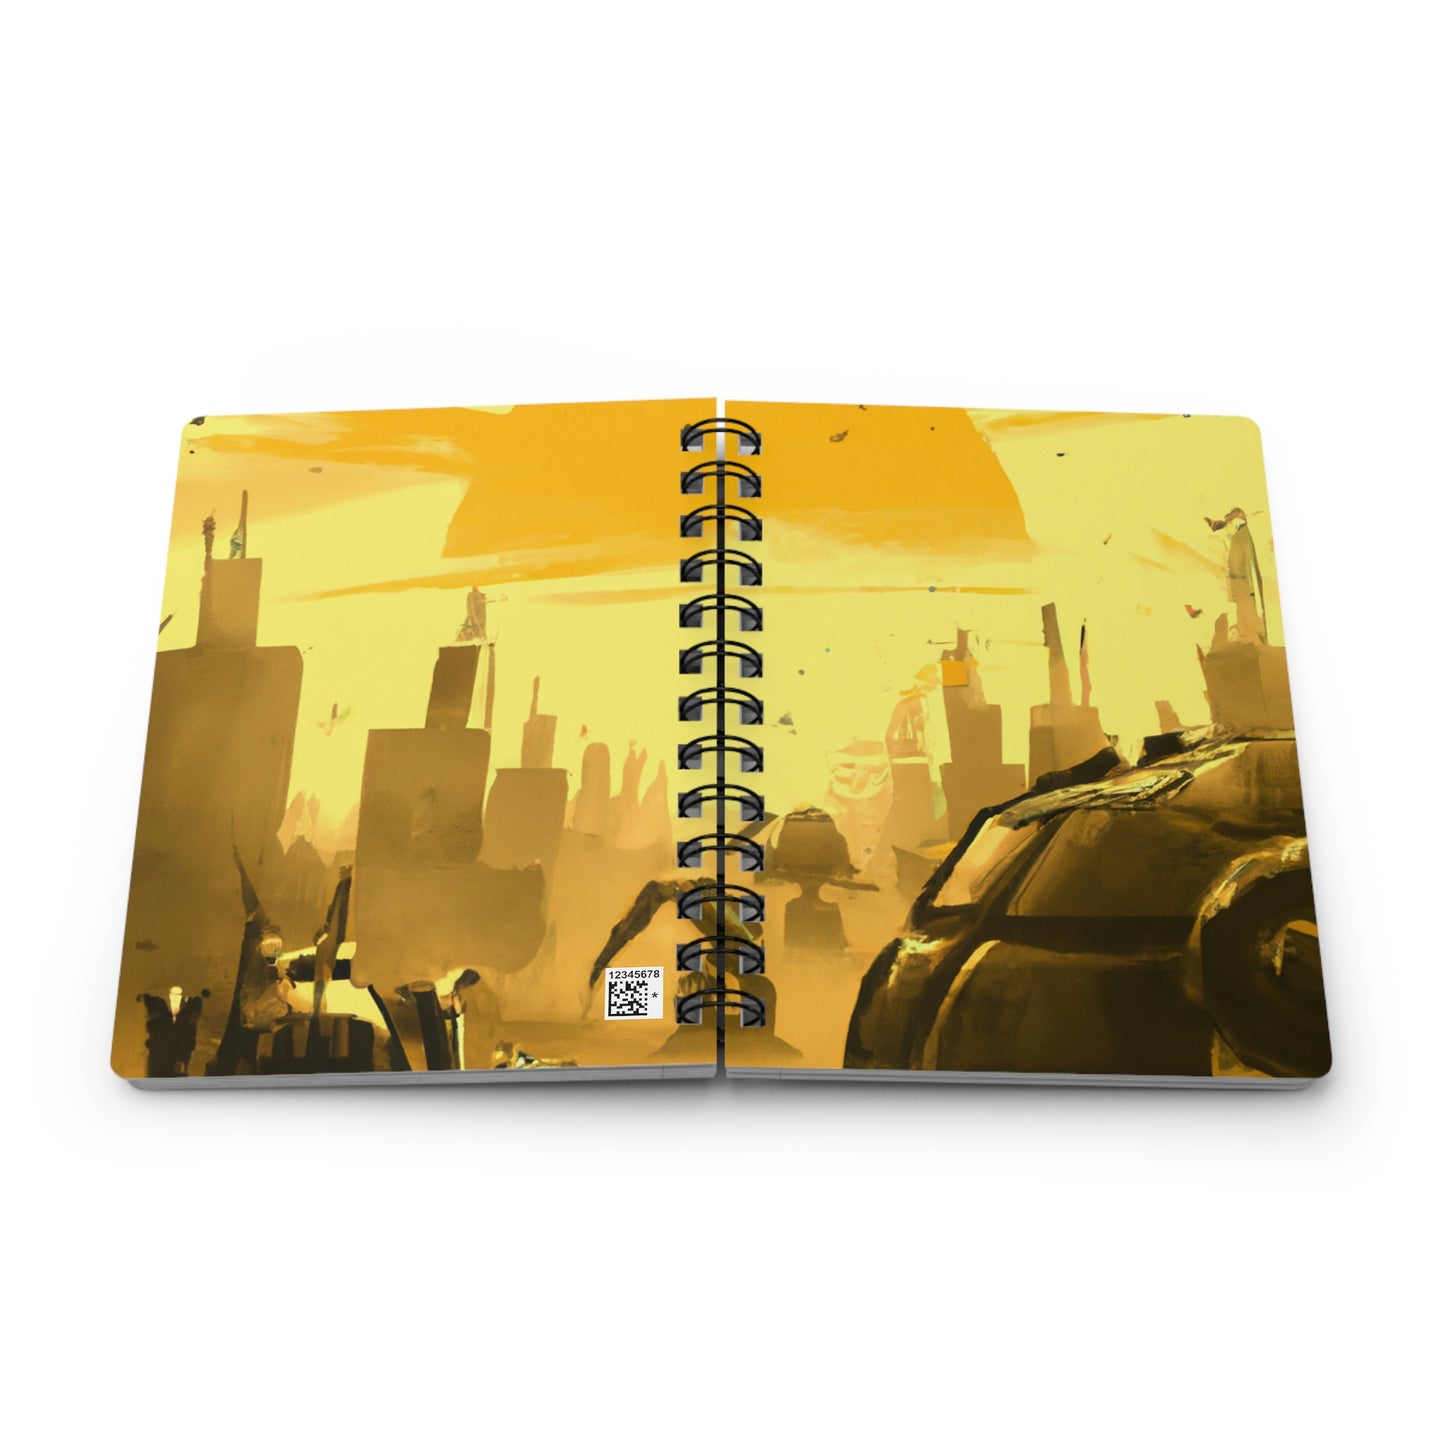 "Robotopia: A Post-Apocalyptic City" - The Alien Spiral Bound Journal